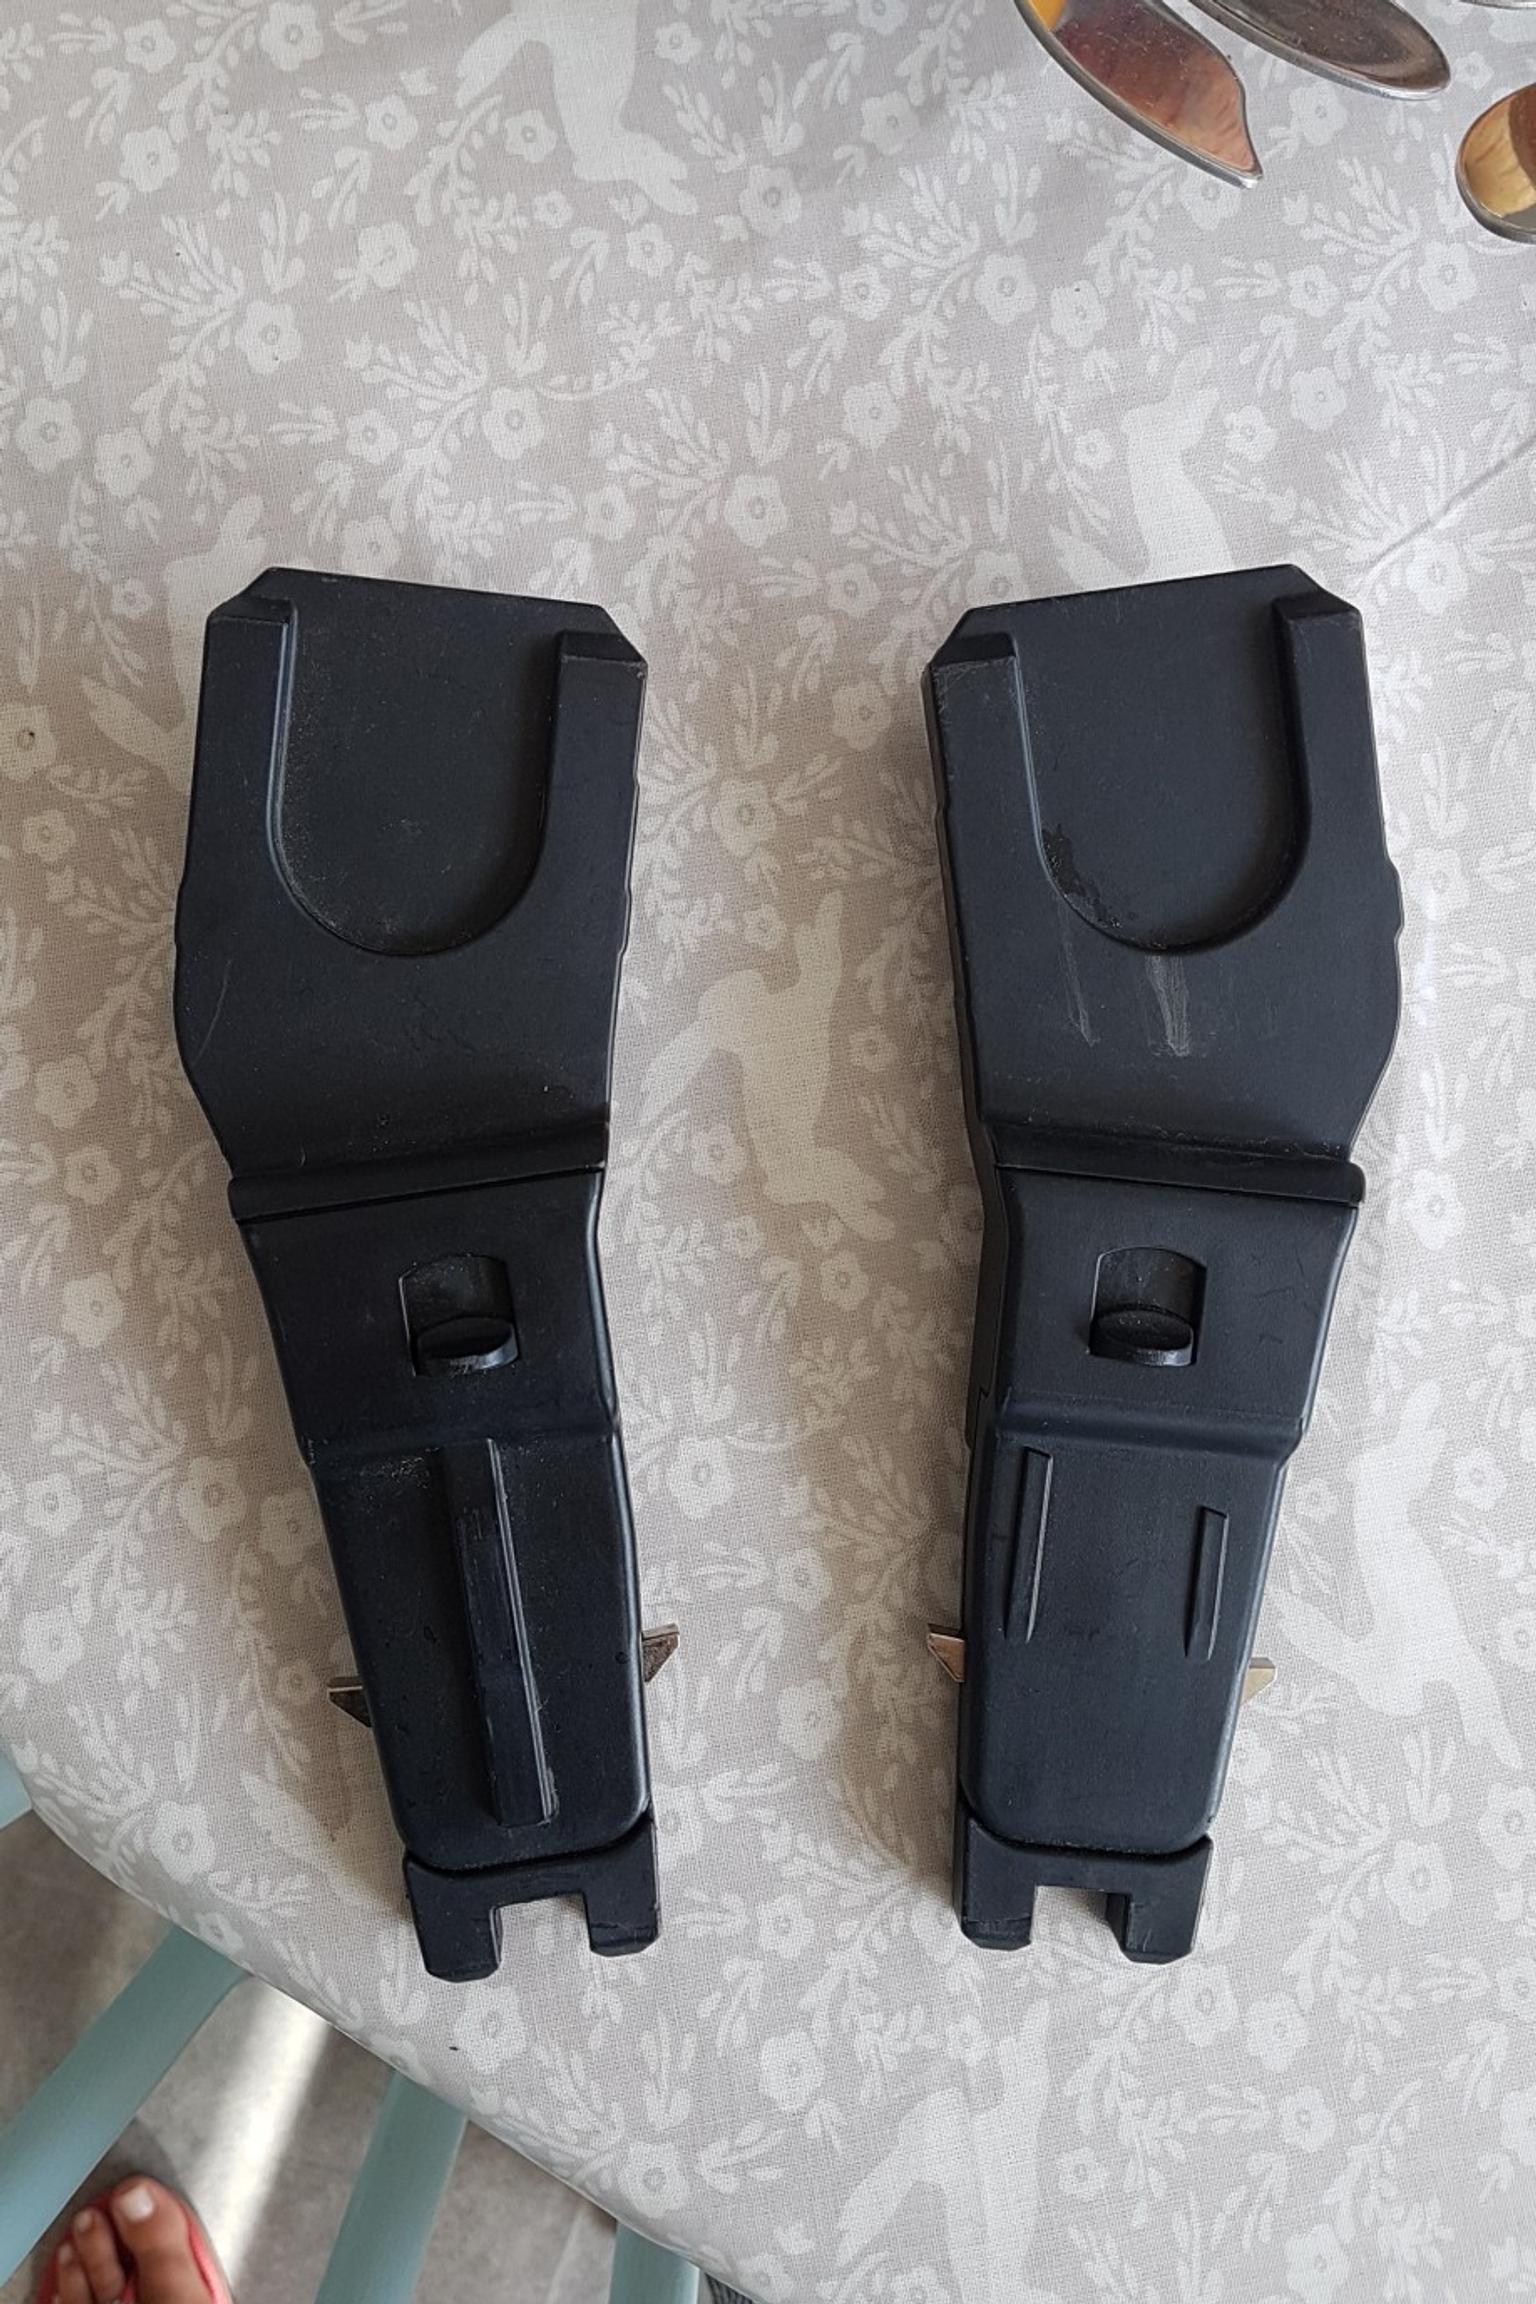 mothercare orb car seat travel system adaptors